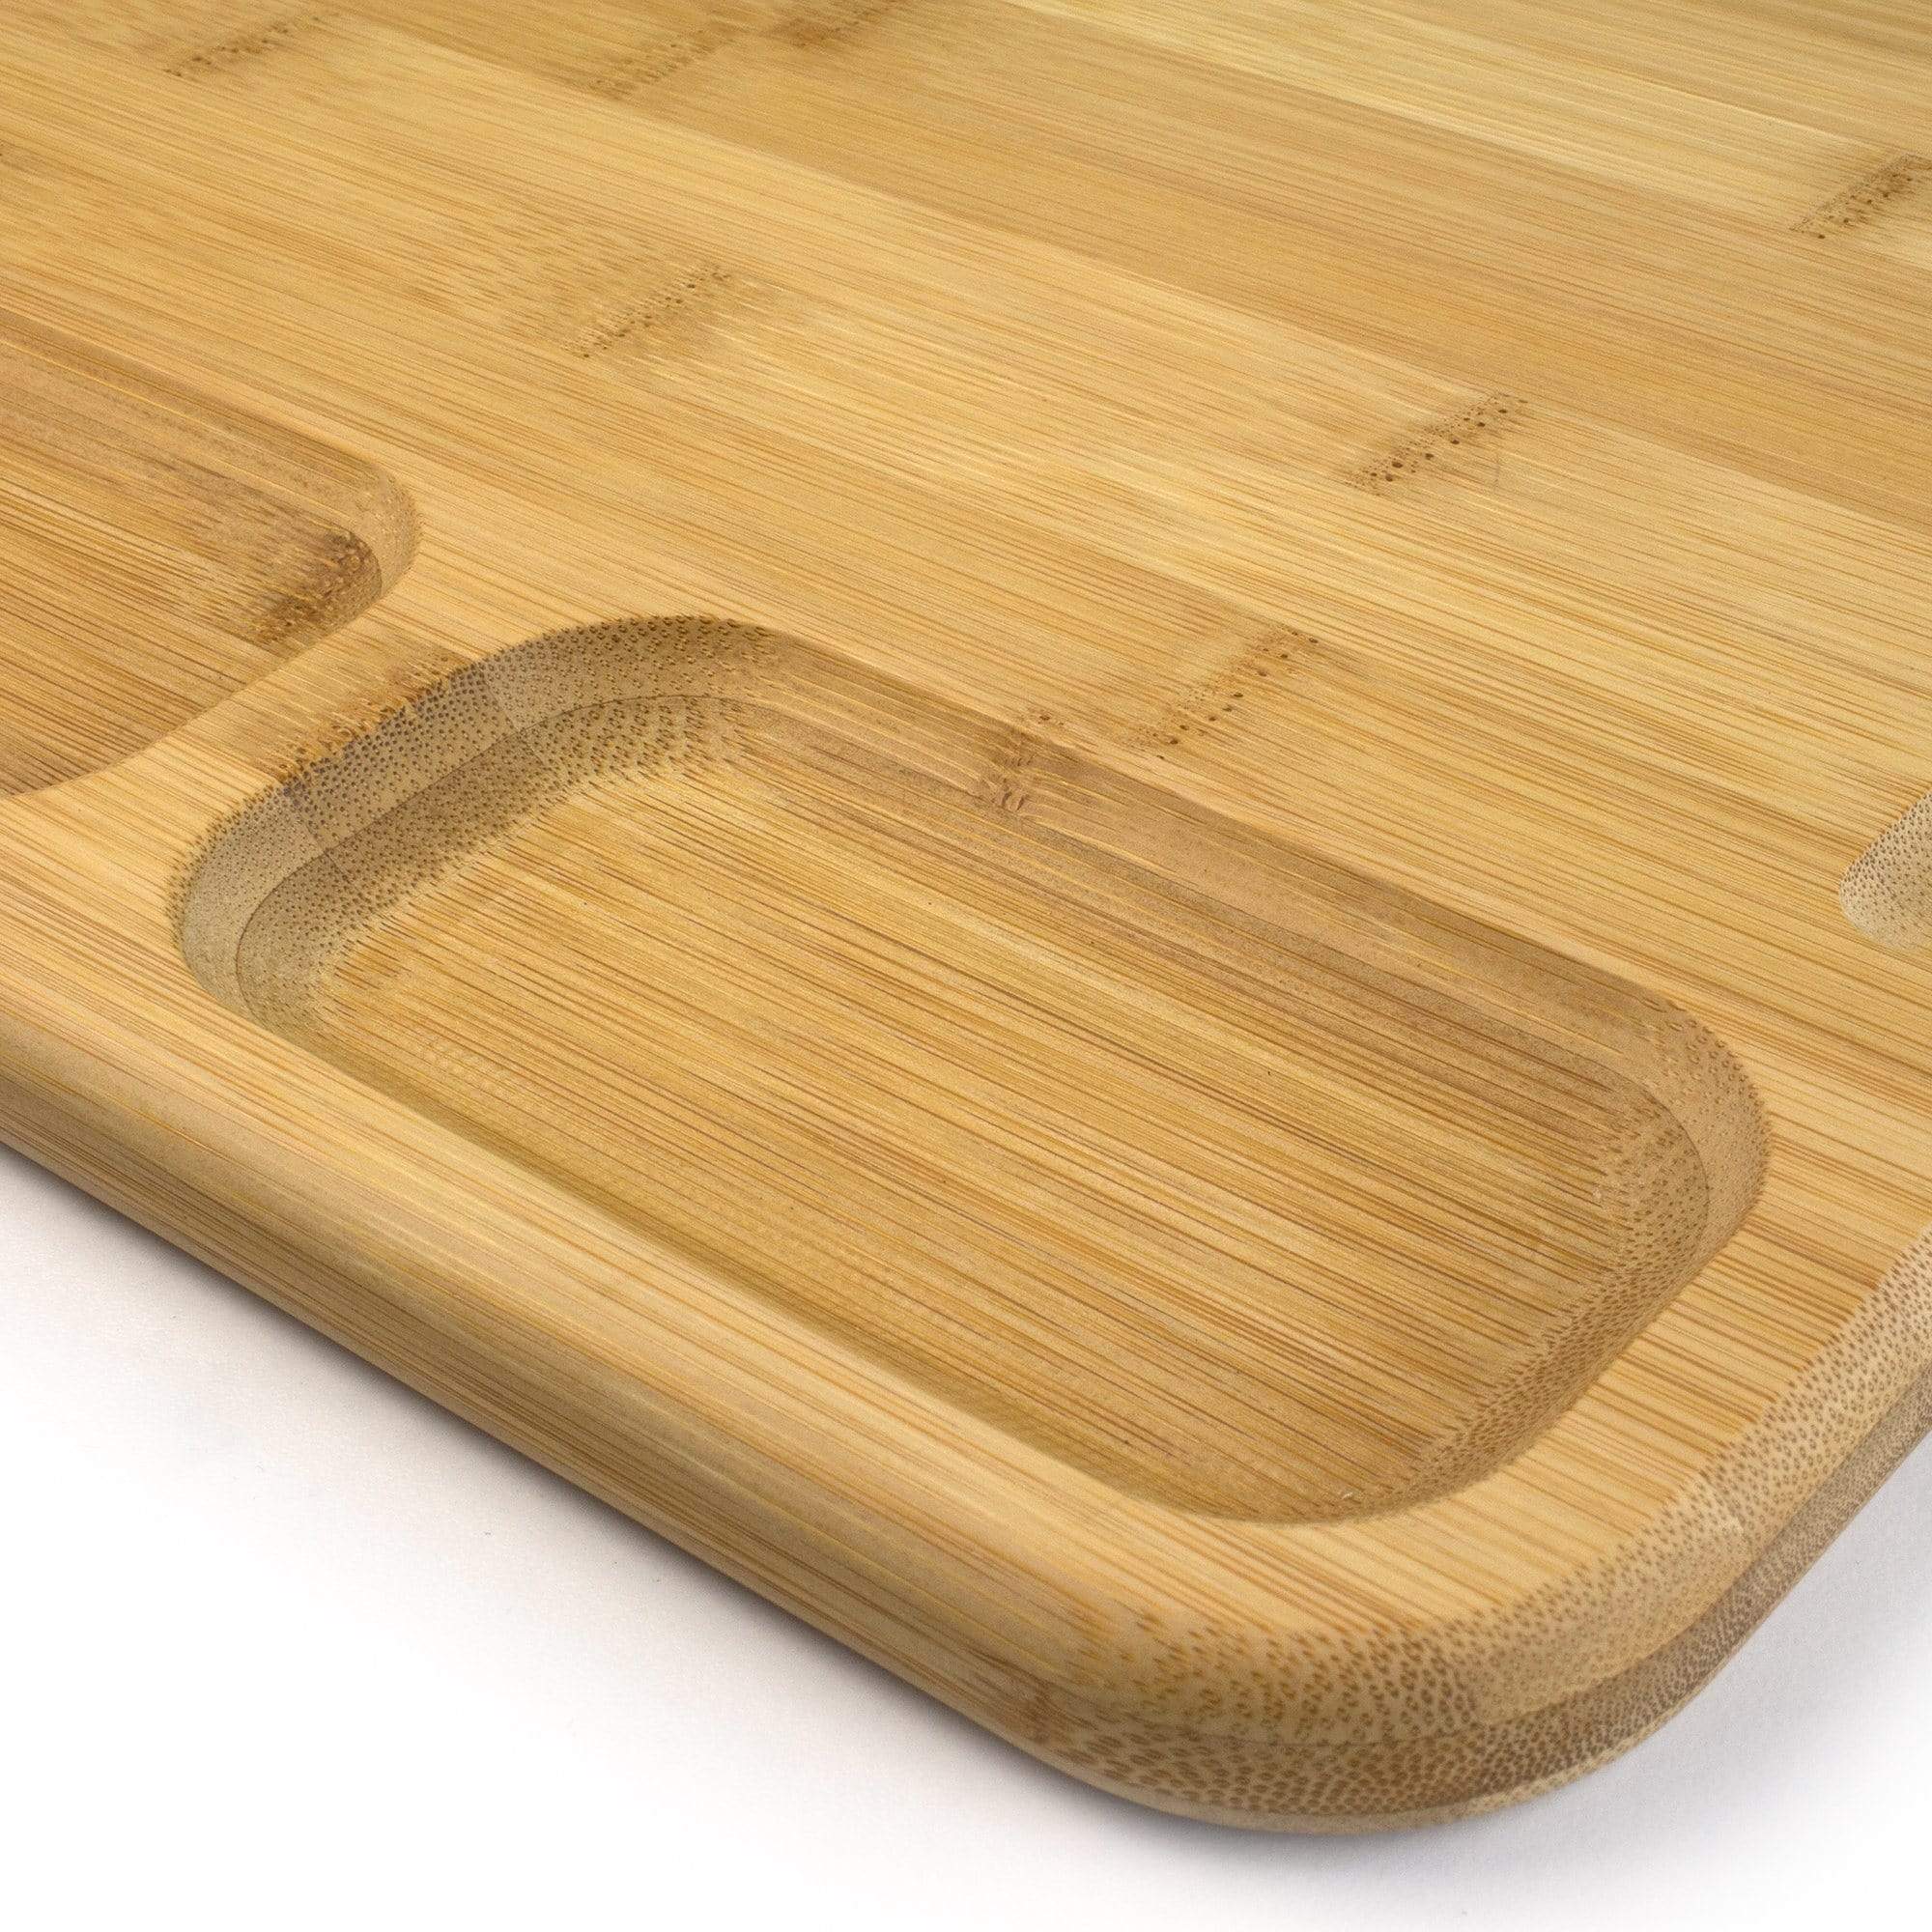 3-Well Kitchen Prep Cutting Board with Juice Groove, 17-1/2